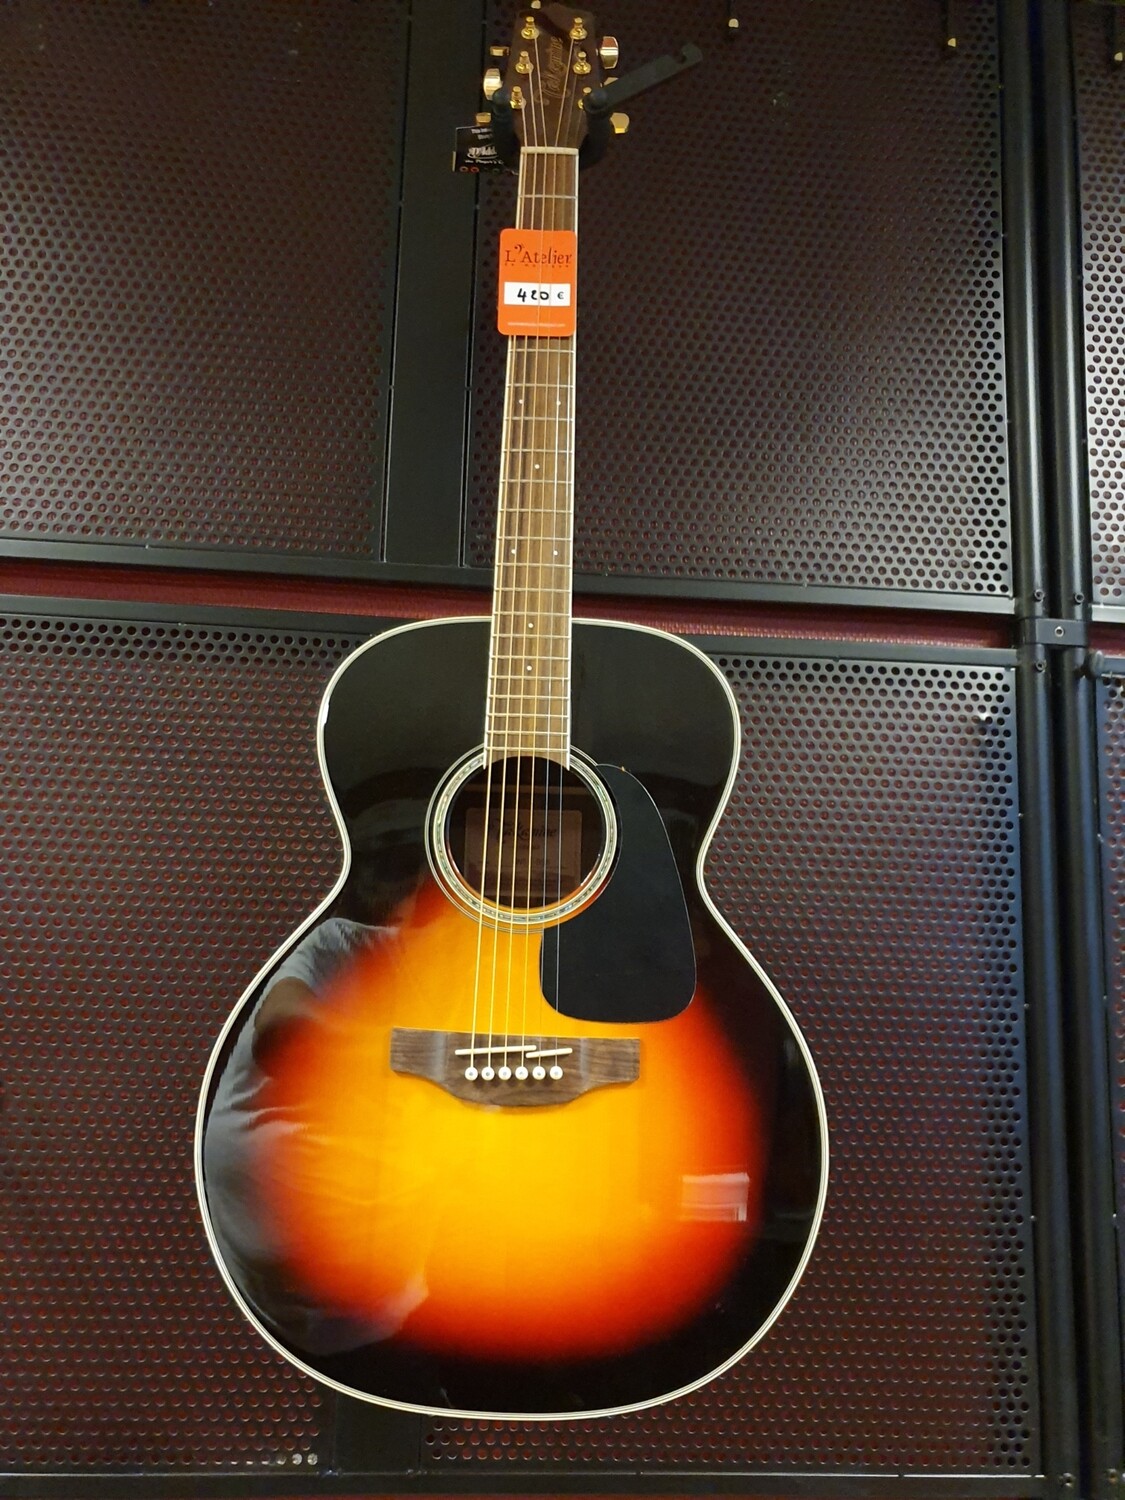 Takamine GN51 BSB